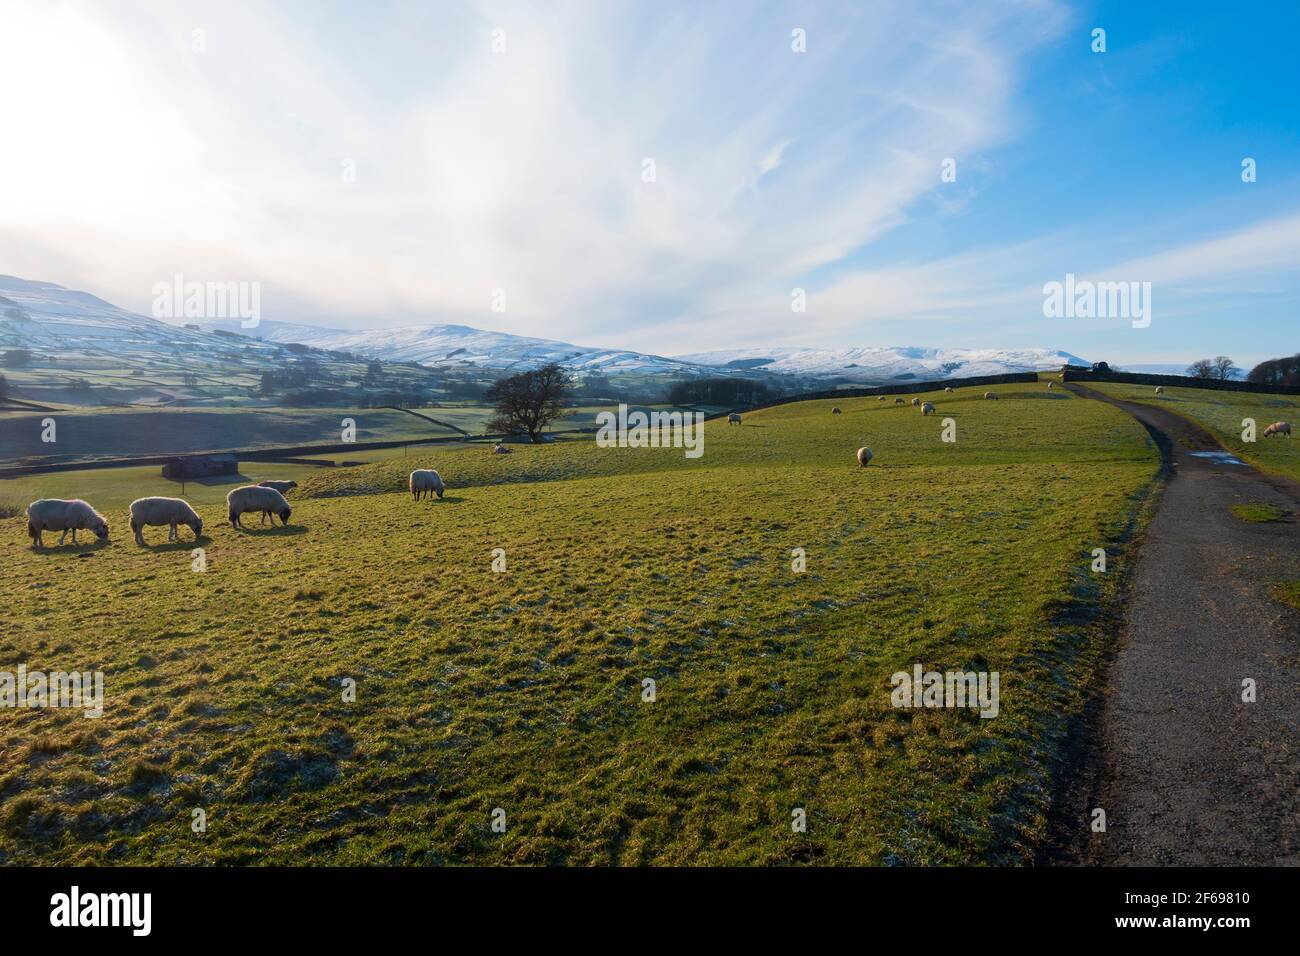 Pascolo delle pecore in inverno a Wensleydale, Yorkshire Dales National Park Foto Stock